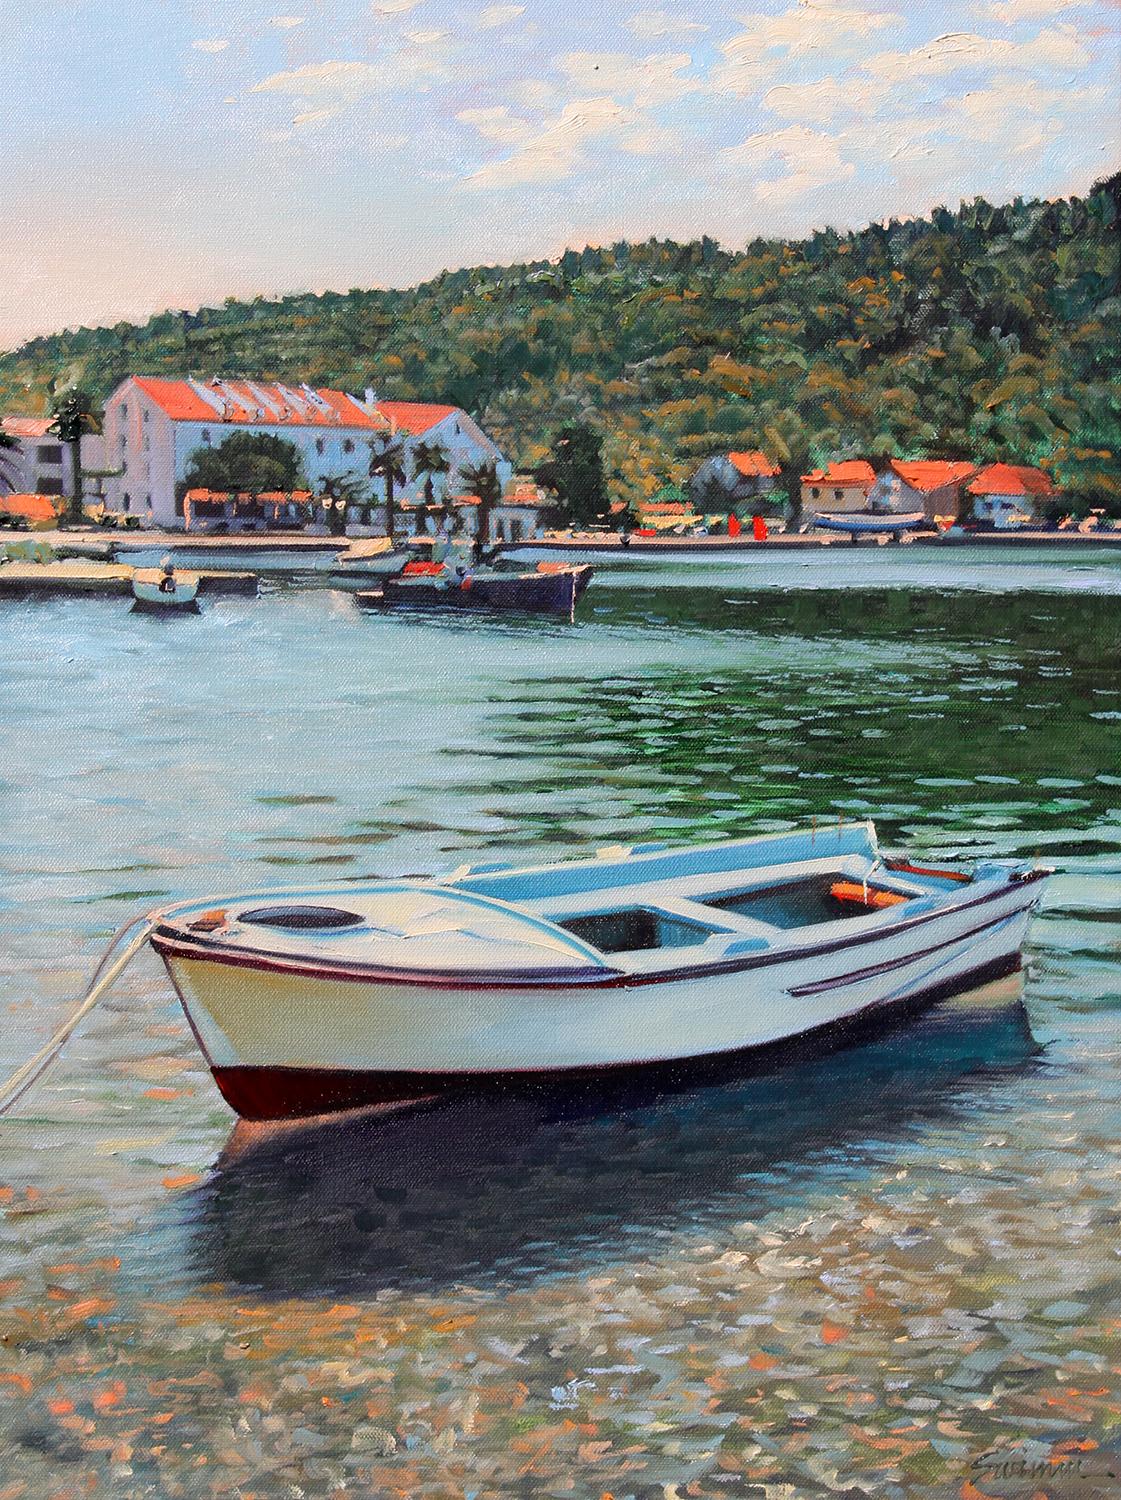 Tom Swimm Landscape Painting -  "Colors Of Croatia" Fishing Boat In Harbor With Brilliant Water Reflections